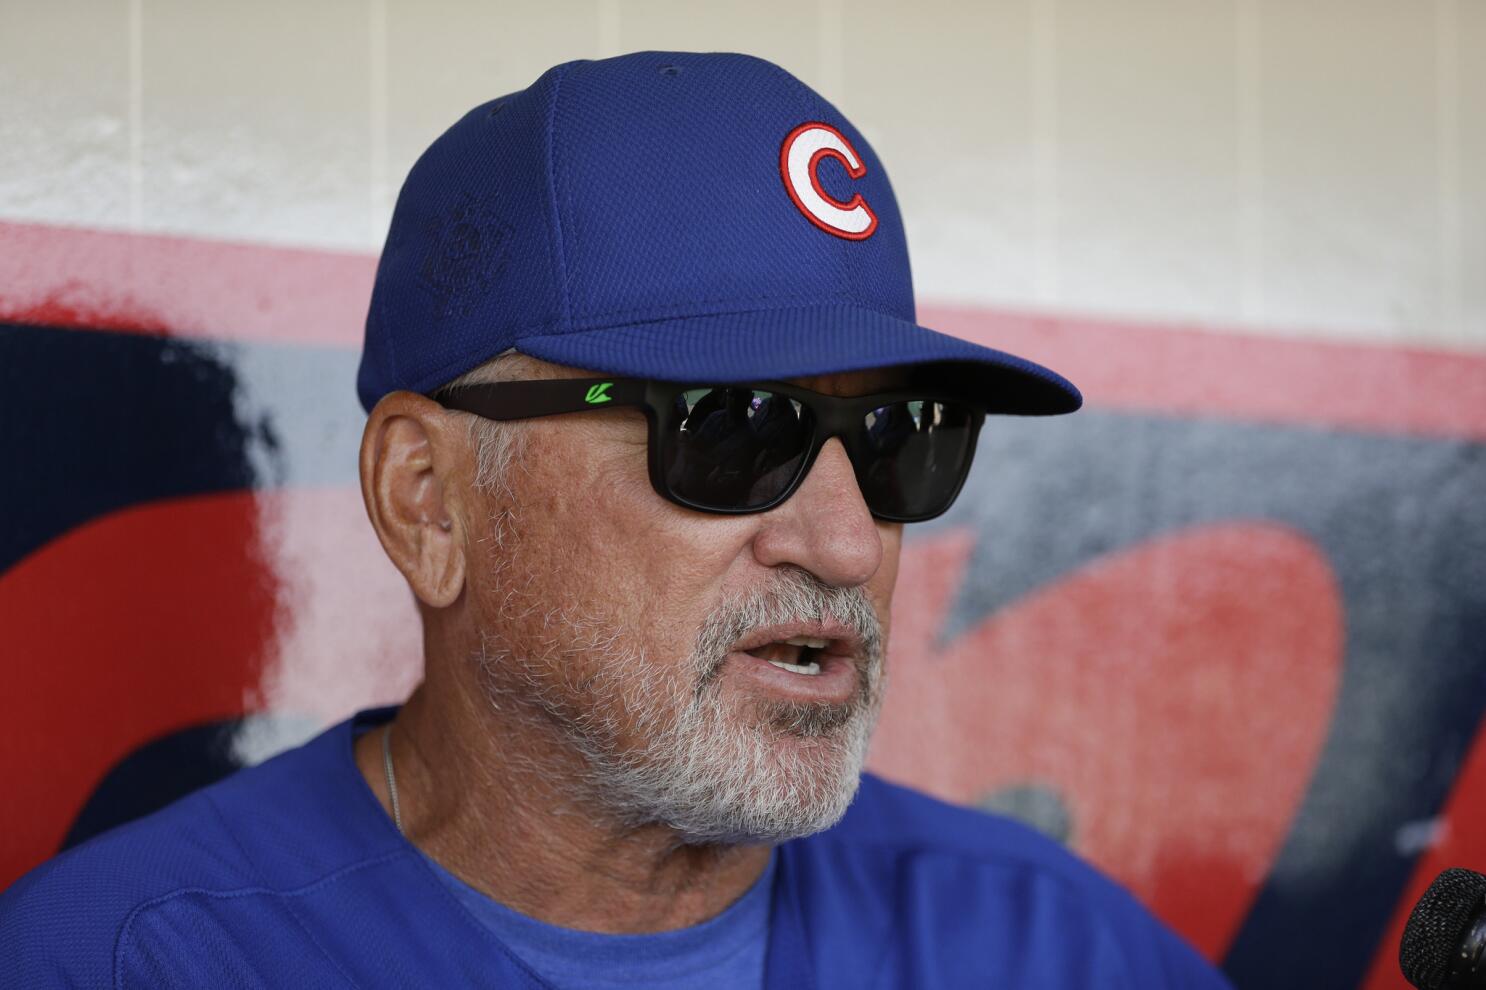 When Joe Maddon was a 27-year-old manager